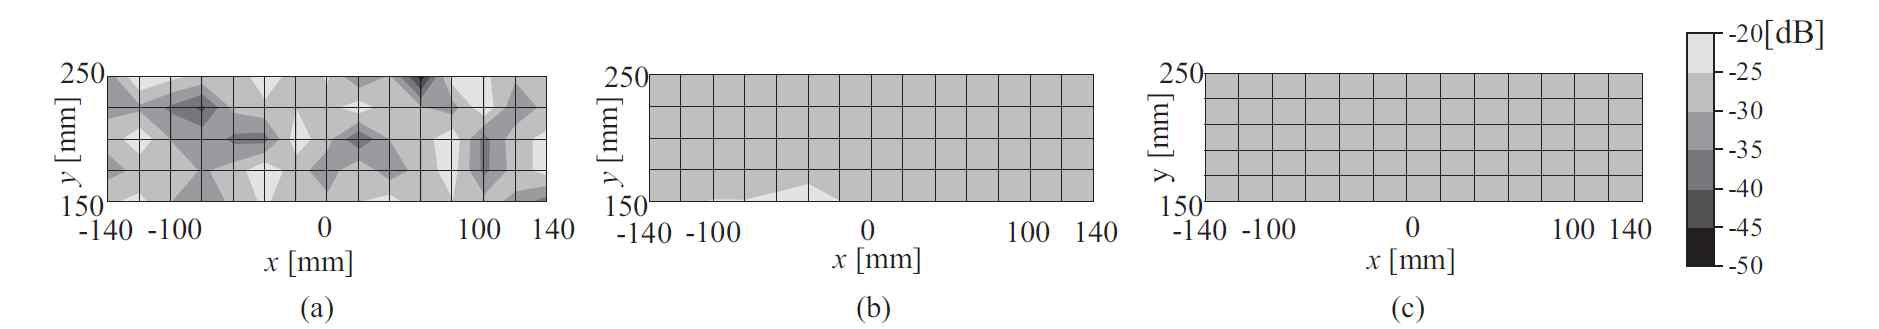 Spatial distributions of propagation gain within the MTM : (a) CW (6.85 GHz), (b) full band UWB (3.1~10.6 GHz), and (c) high band UWB (7.4~7.9 GHz)